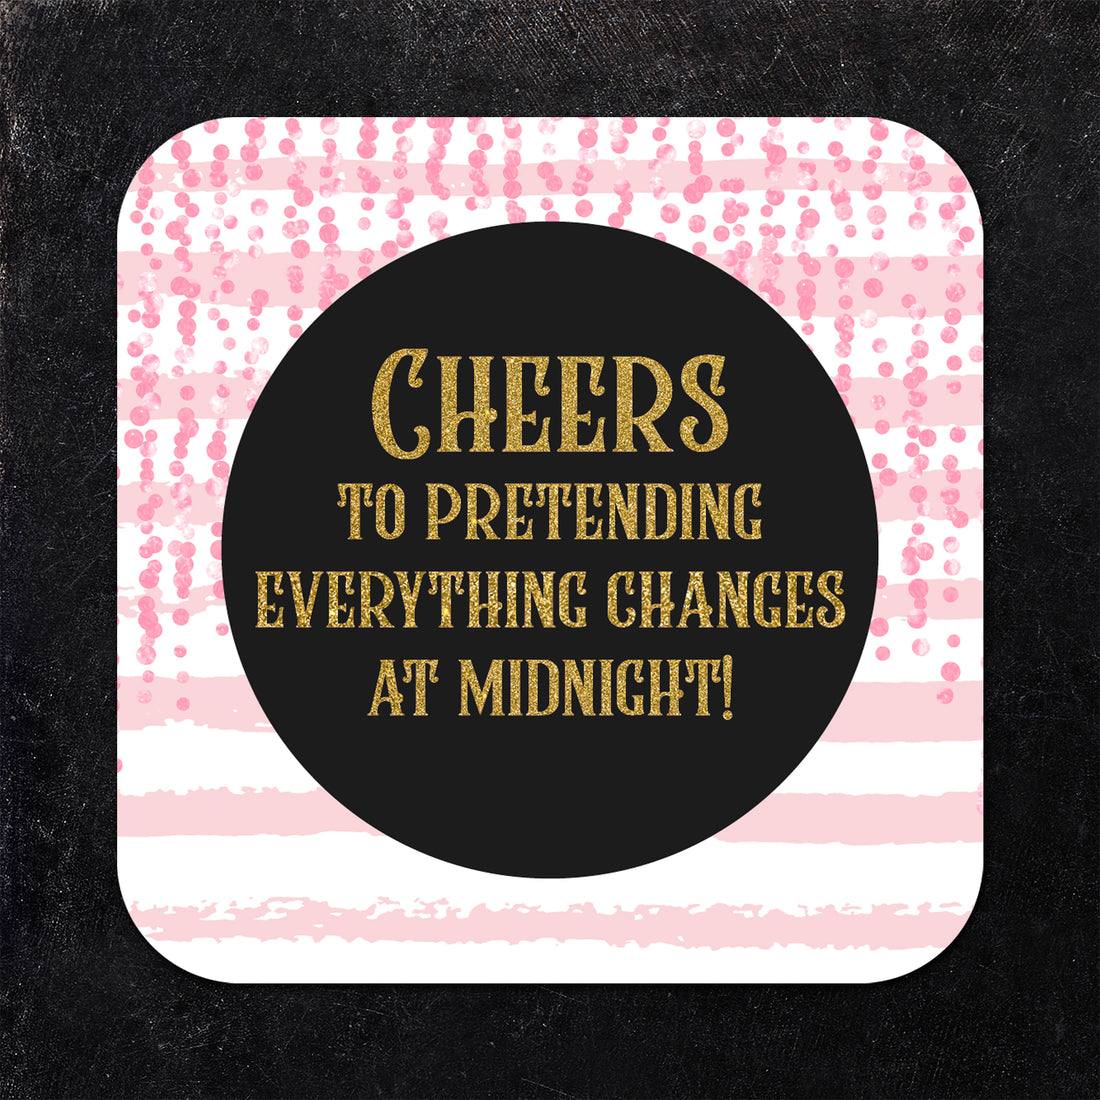 Coaster: Holiday, New Years Eve Cheers to Pretending - Pack of 6